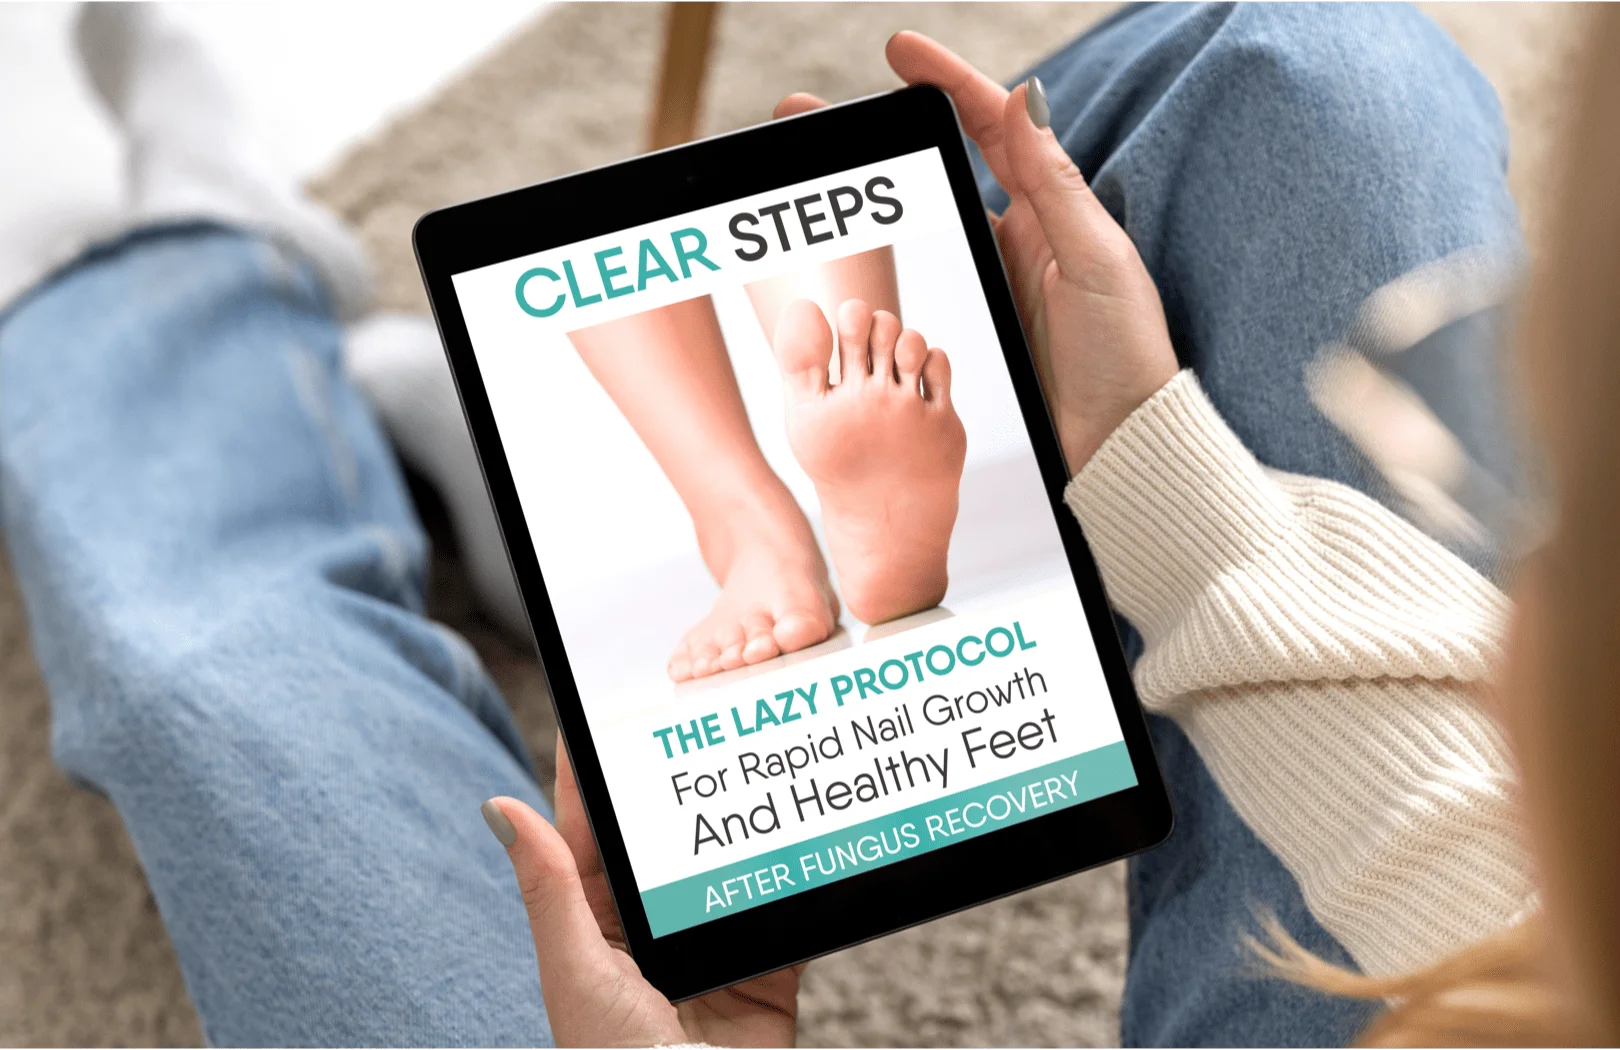 Clear Steps: The Lazy Protocol For Rapid
Nail Growth and Healthy Feet